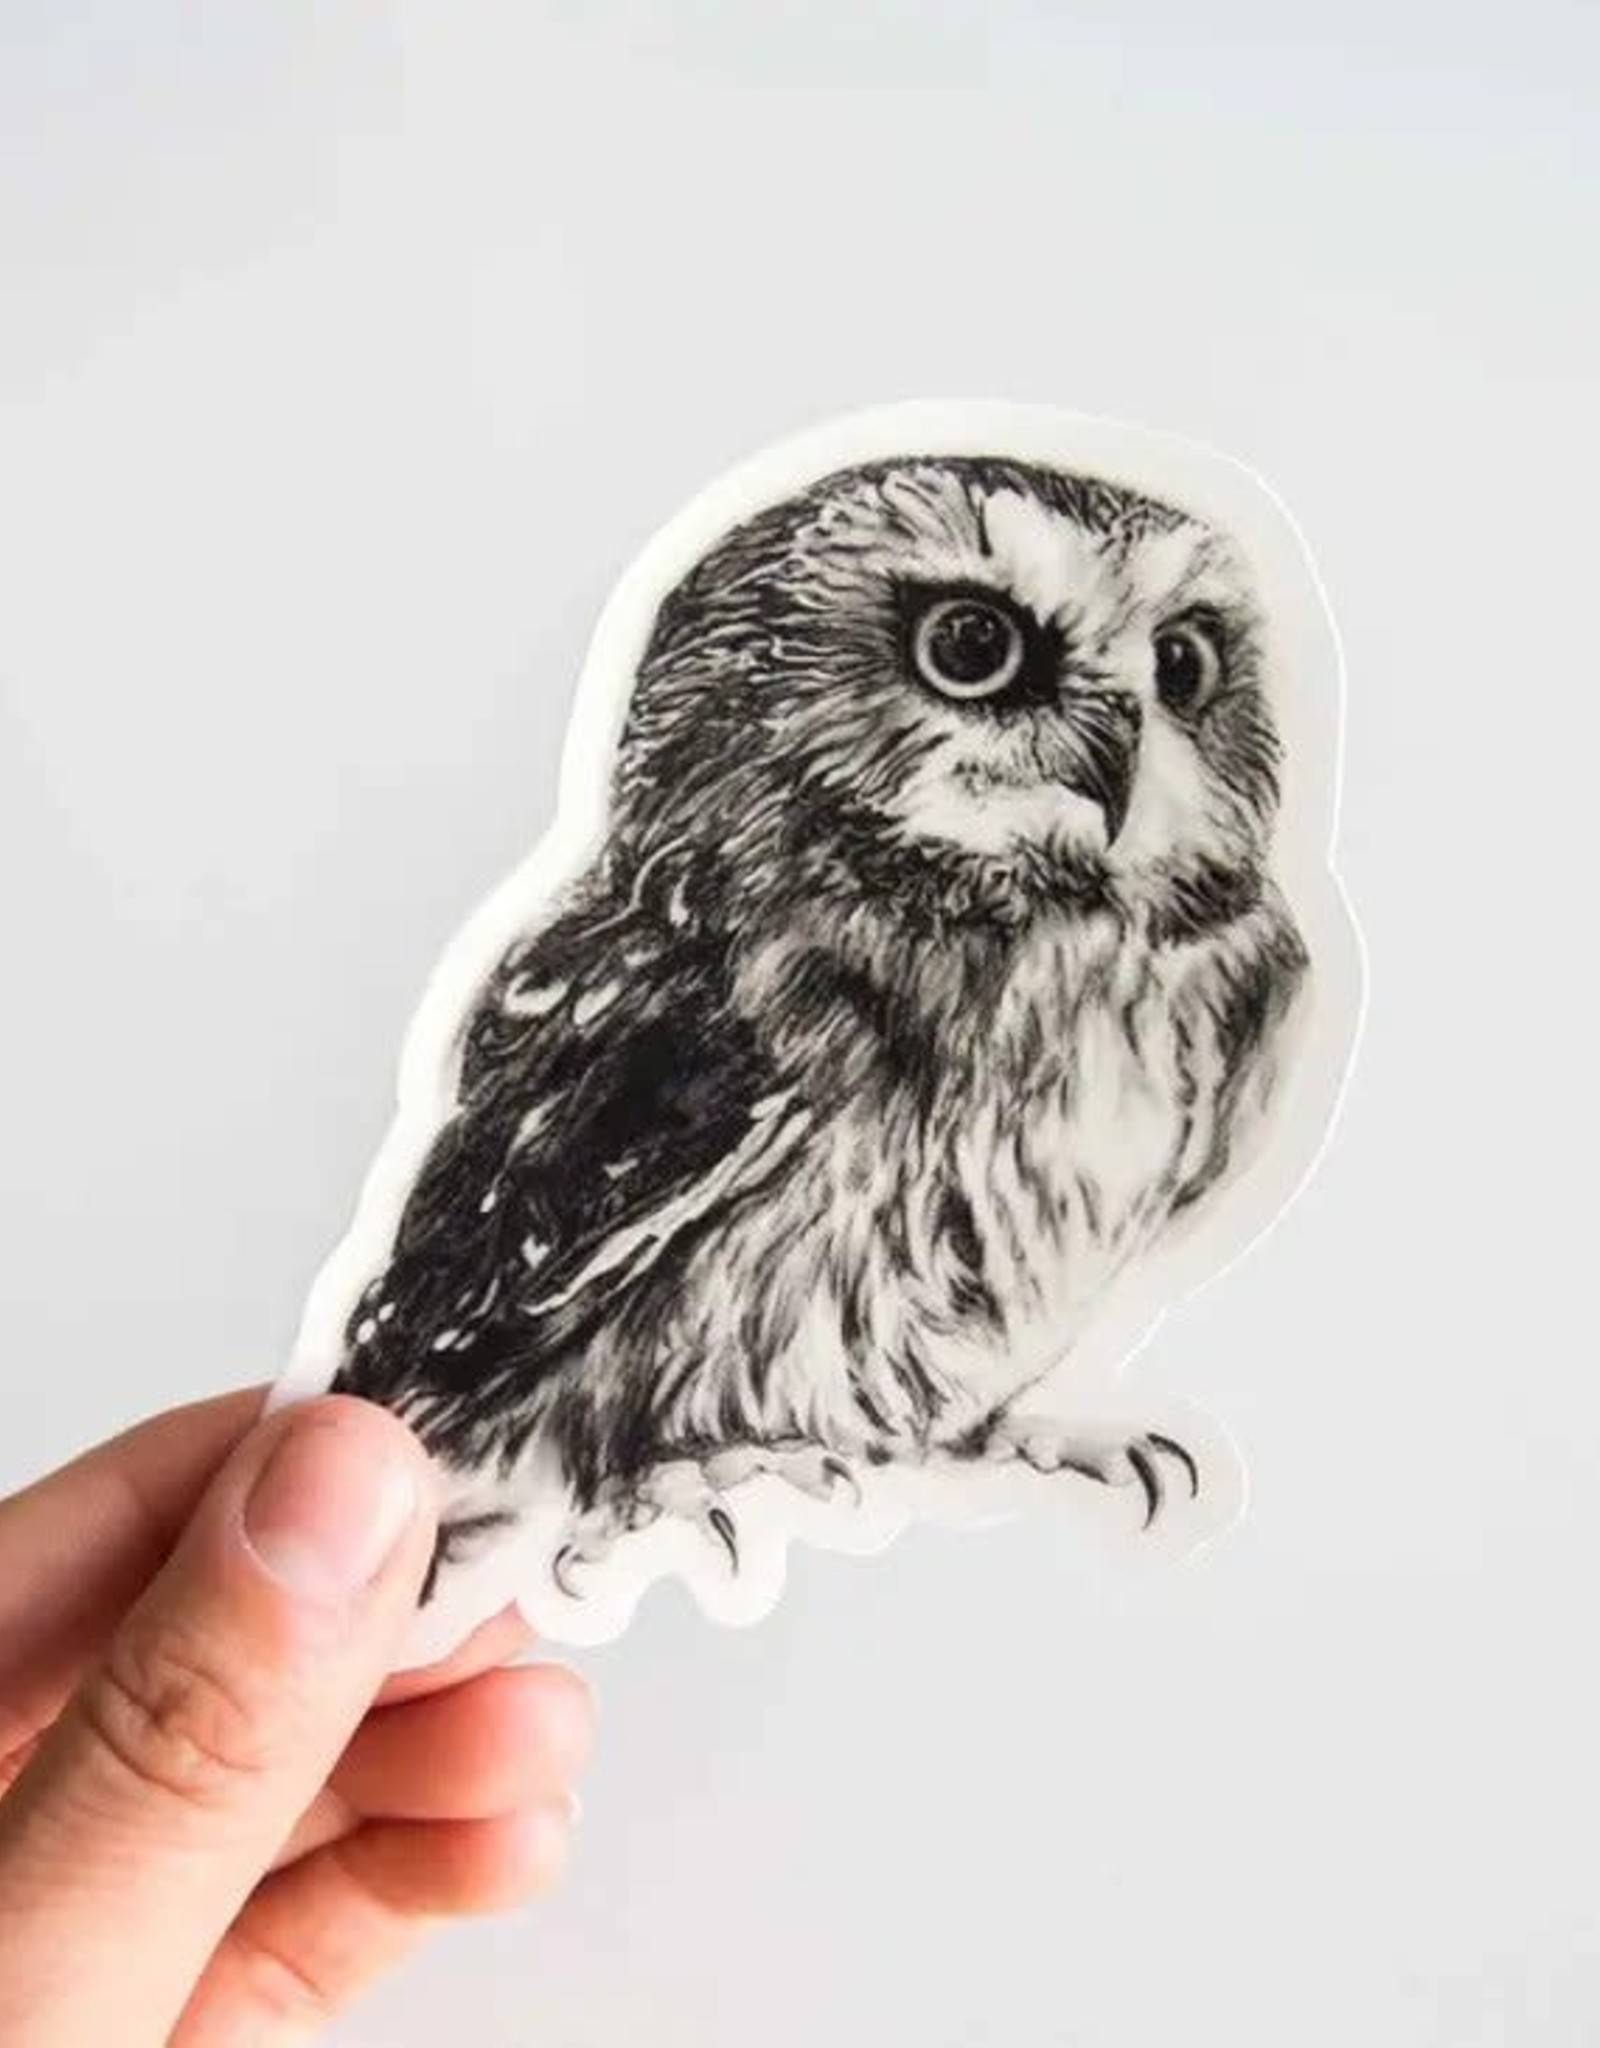 Owl Sticker - Pen and Paper